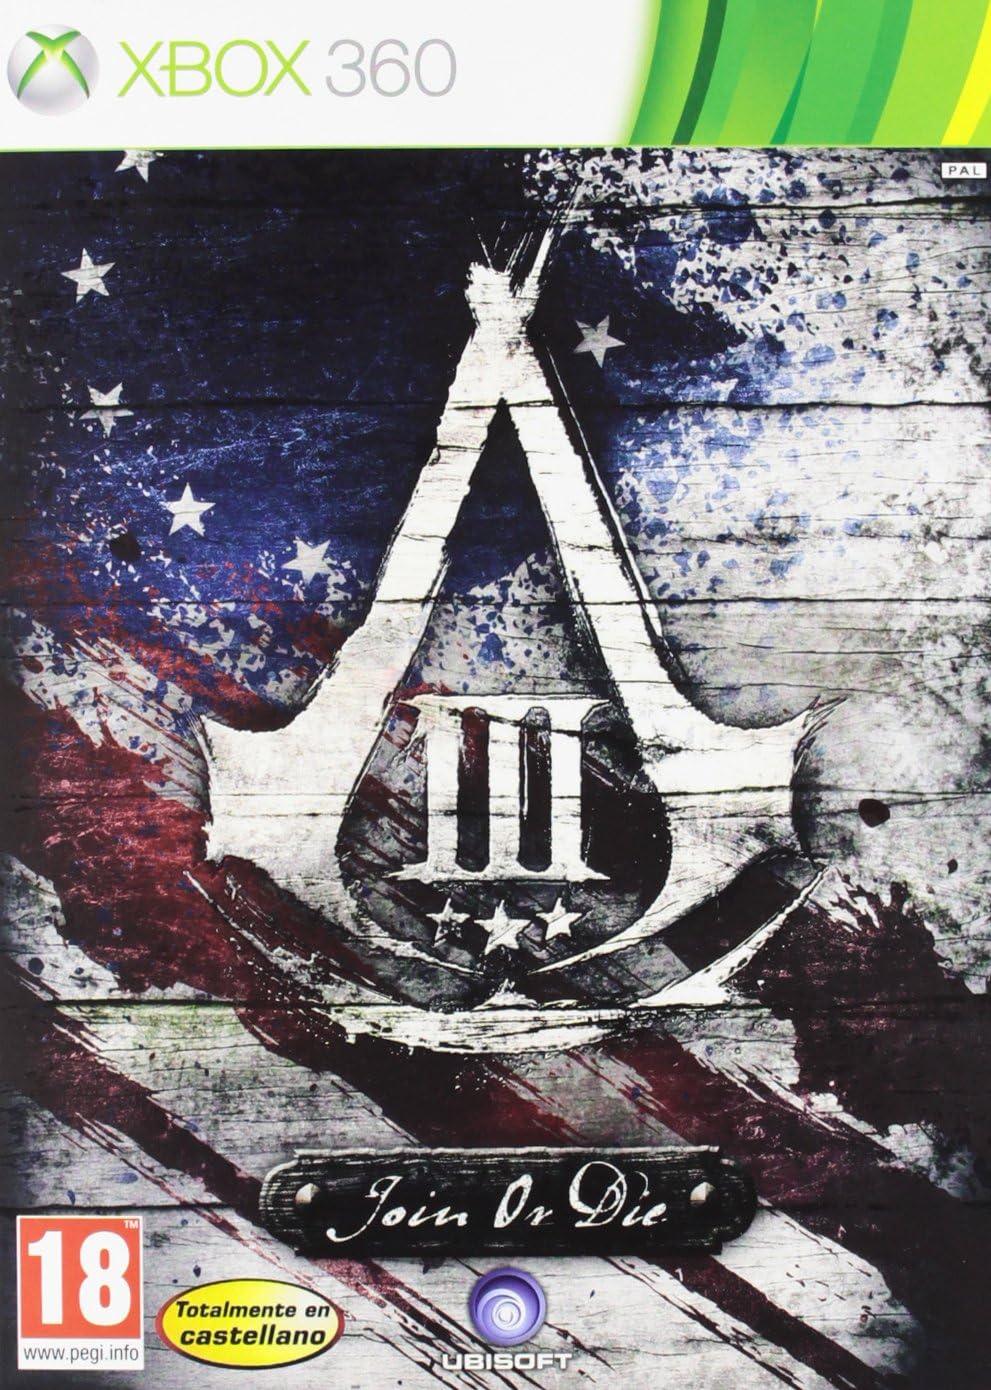 Assassins Creed III - Join Or Die Edition (Xbox 360) (Pre-owned) - GameStore.mt | Powered by Flutisat